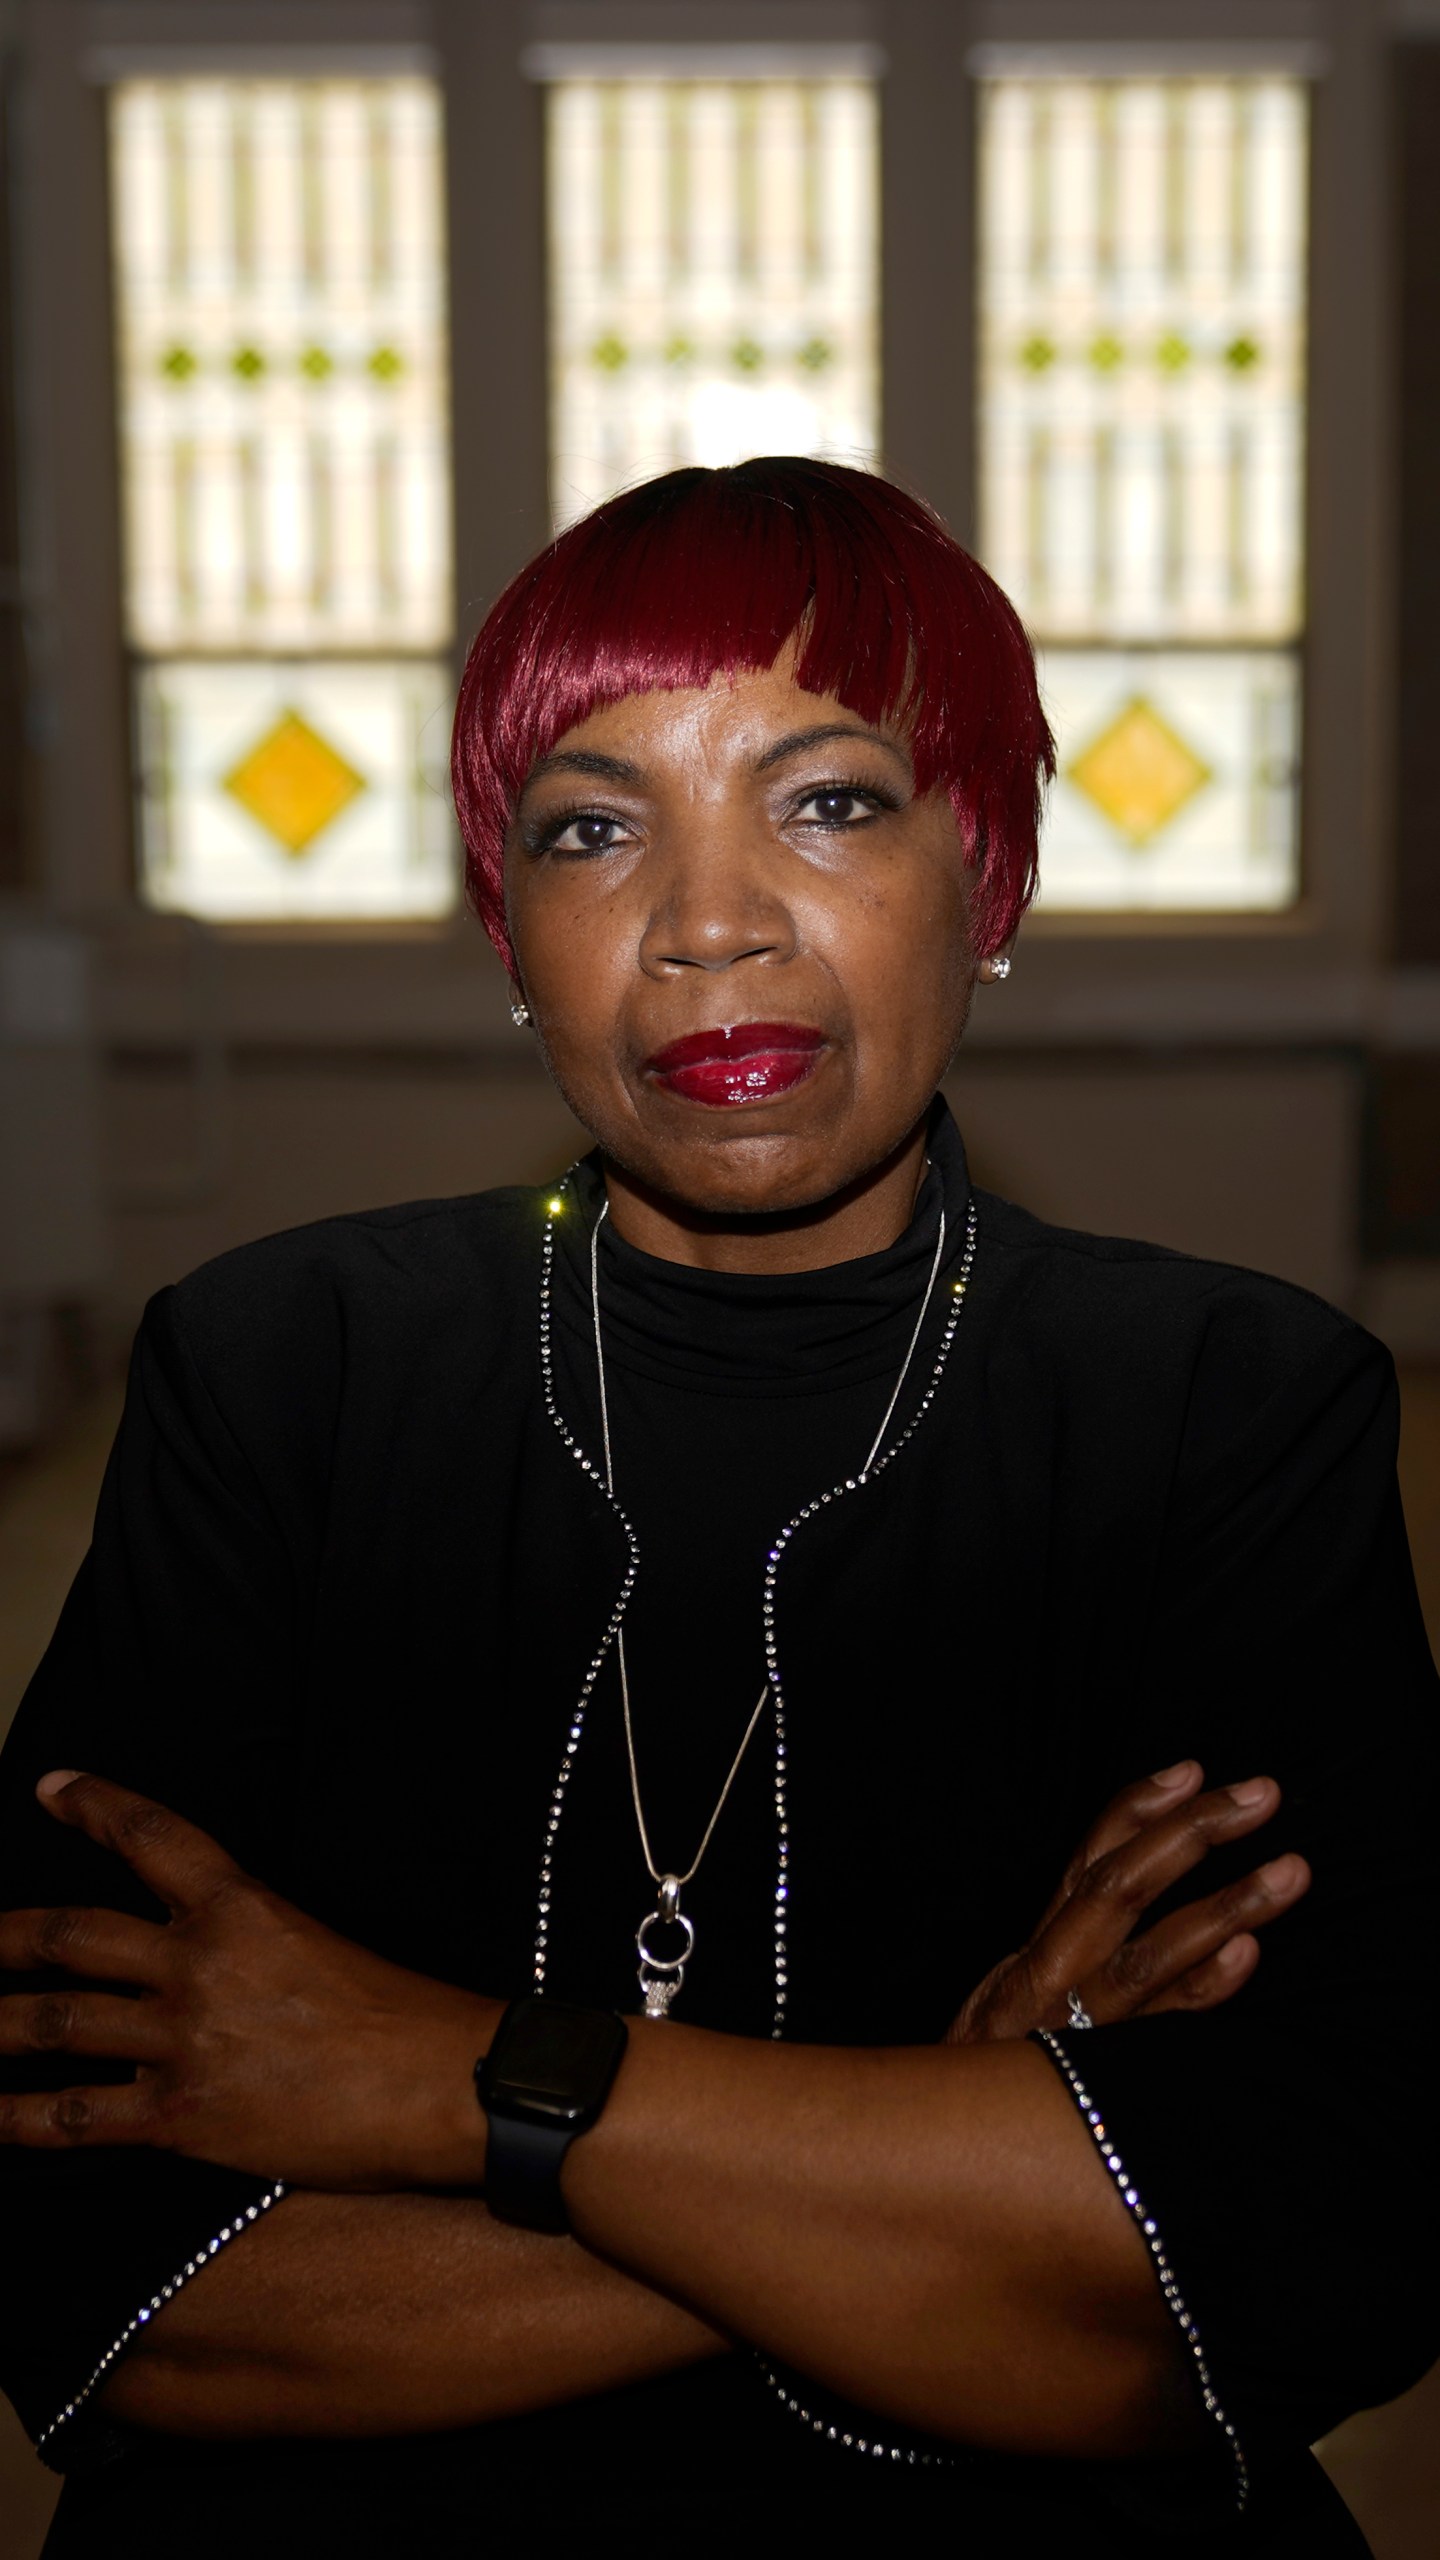 Doris Milton, 63, sits for a portrait at the Bethel New Life holistic wellness center Thursday, Feb. 15, 2024, in Chicago. In some ways, Doris Milton is a Head Start success story. A student in one of Chicago's inaugural Head Start classes, when the federally-funded early education program was in its infancy. Milton followed in her teacher's footsteps, now a Head Start teacher in Chicago, but after more than four decades on the job, Milton, 63, earns $22 an hour. It's a wage that puts her above the federal poverty line, but she is far from financially secure. (AP Photo/Charles Rex Arbogast)